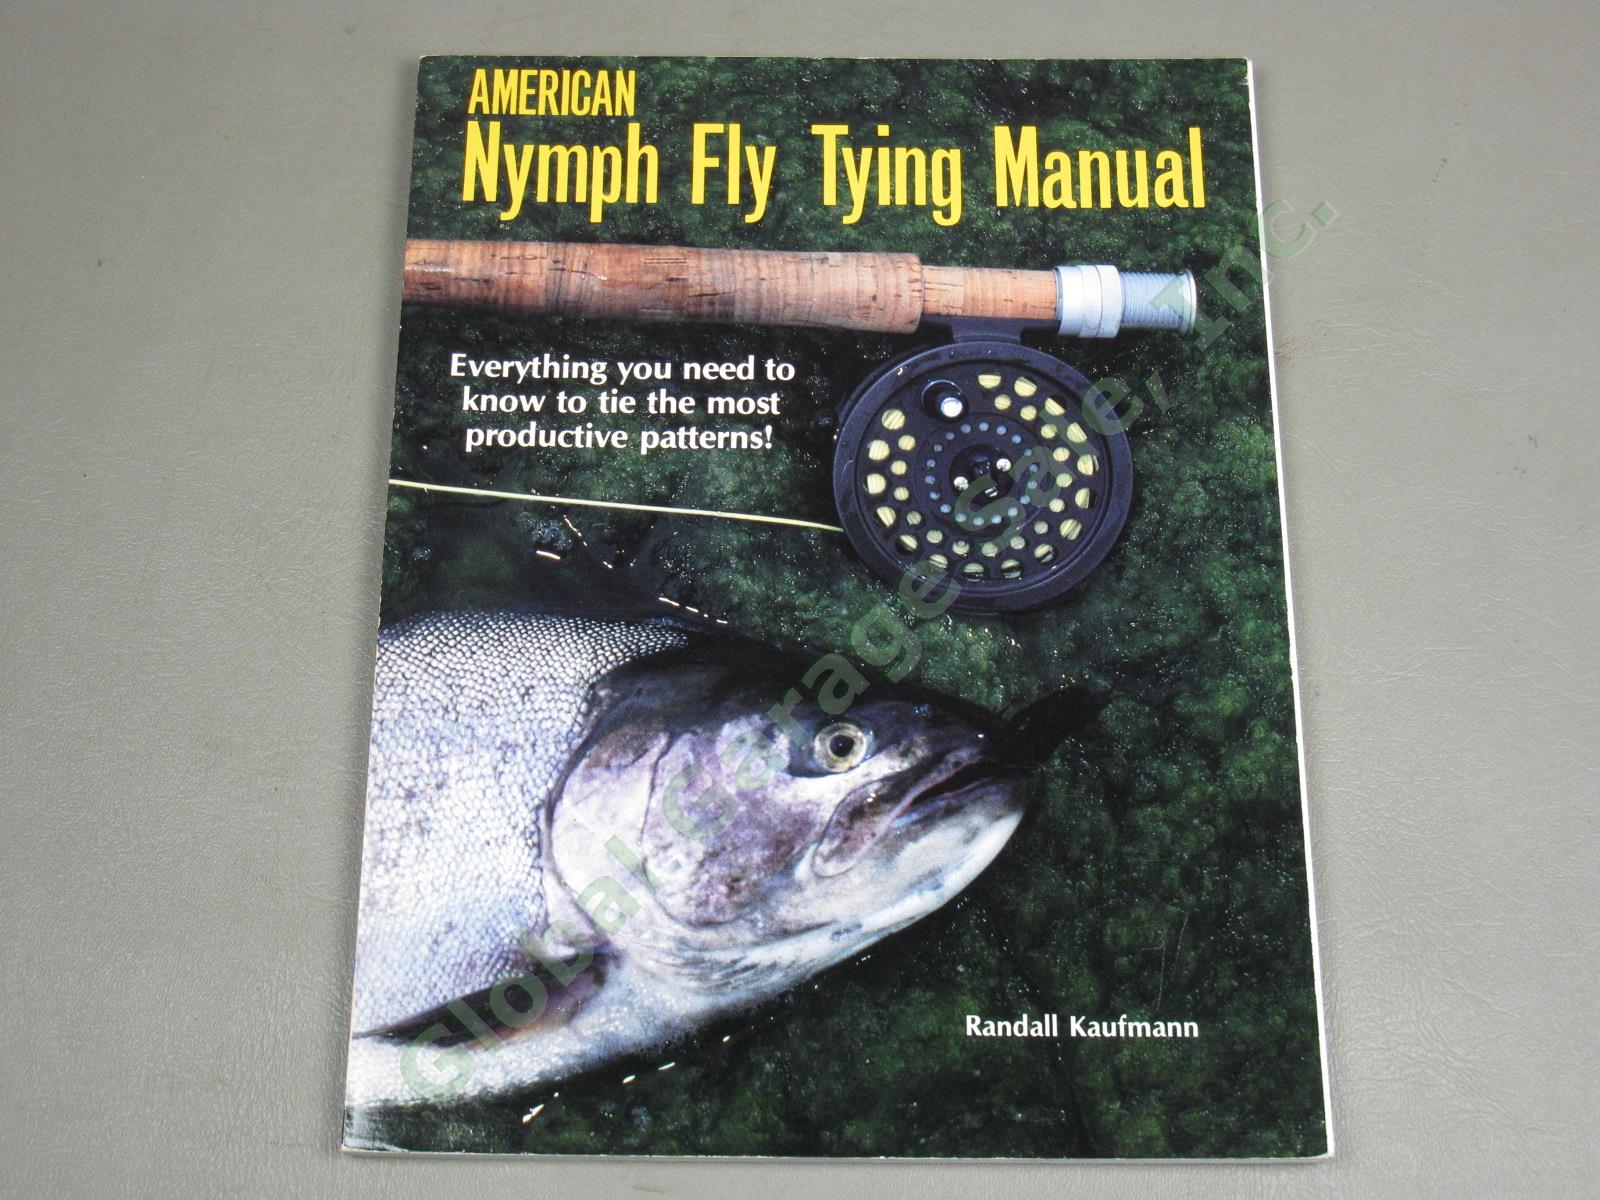 19 Fly Tying Manuals Fishing Books Lot Trout Flies Nymphs Tricos Emergers HC+ NR 8